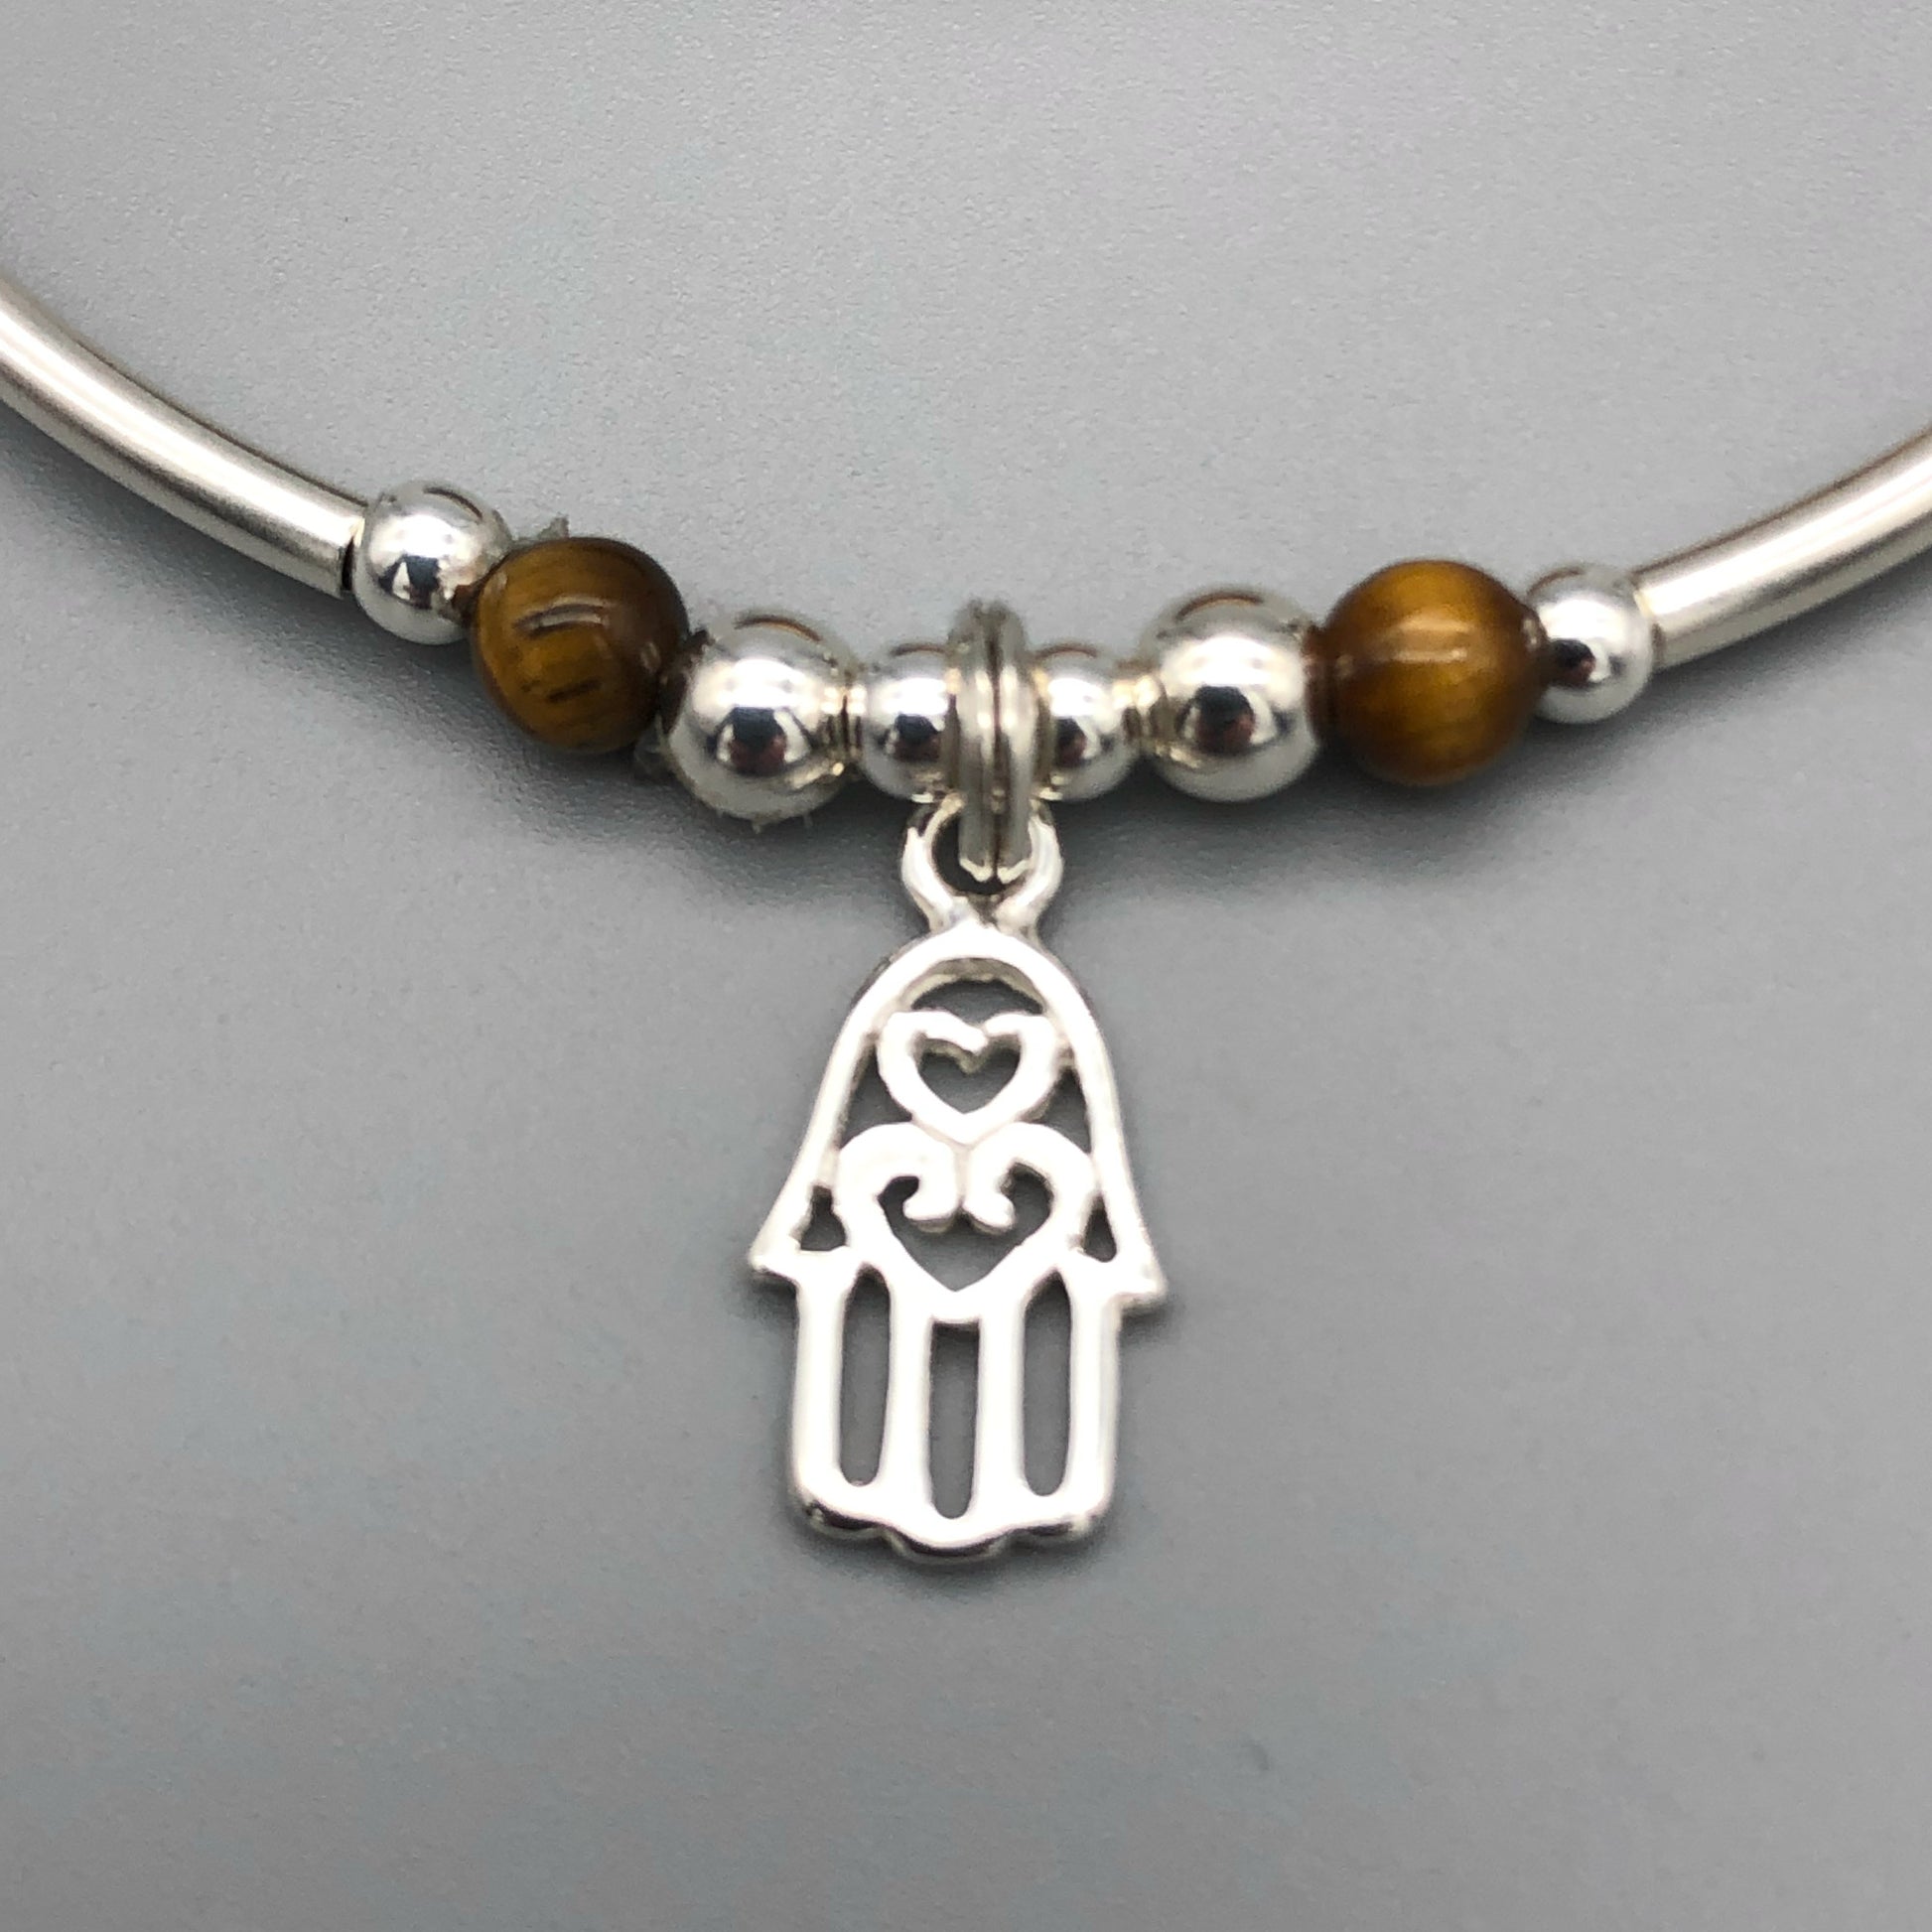 Closeup of Hamsa Hand Charm Tigers Eye Beads Sterling Silver Women's Stacking Bracelet by My Silver Wish